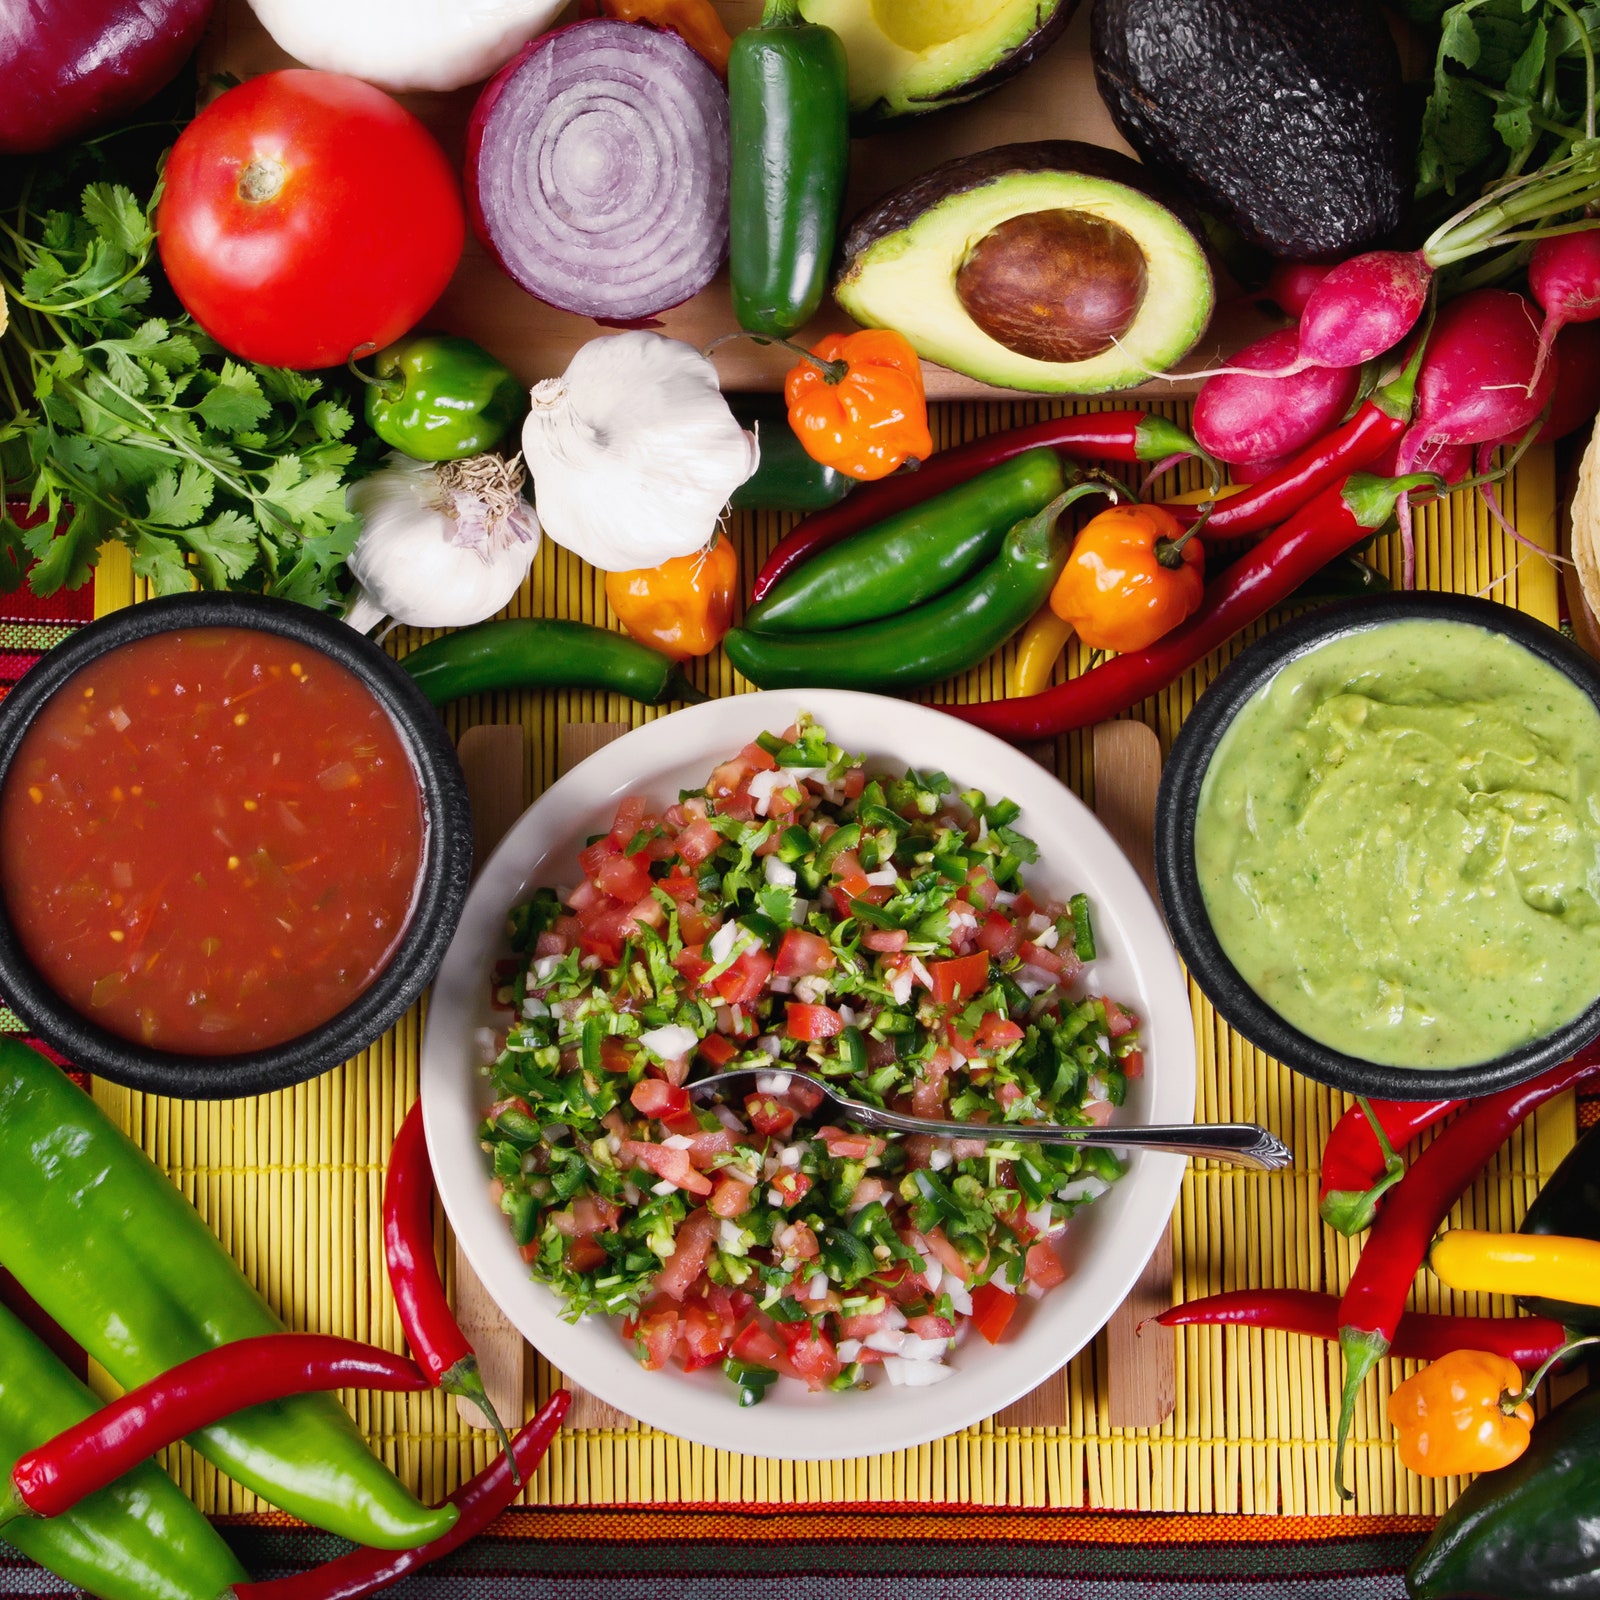 The Easiest Way to Make Delicious Salsa From Scratch